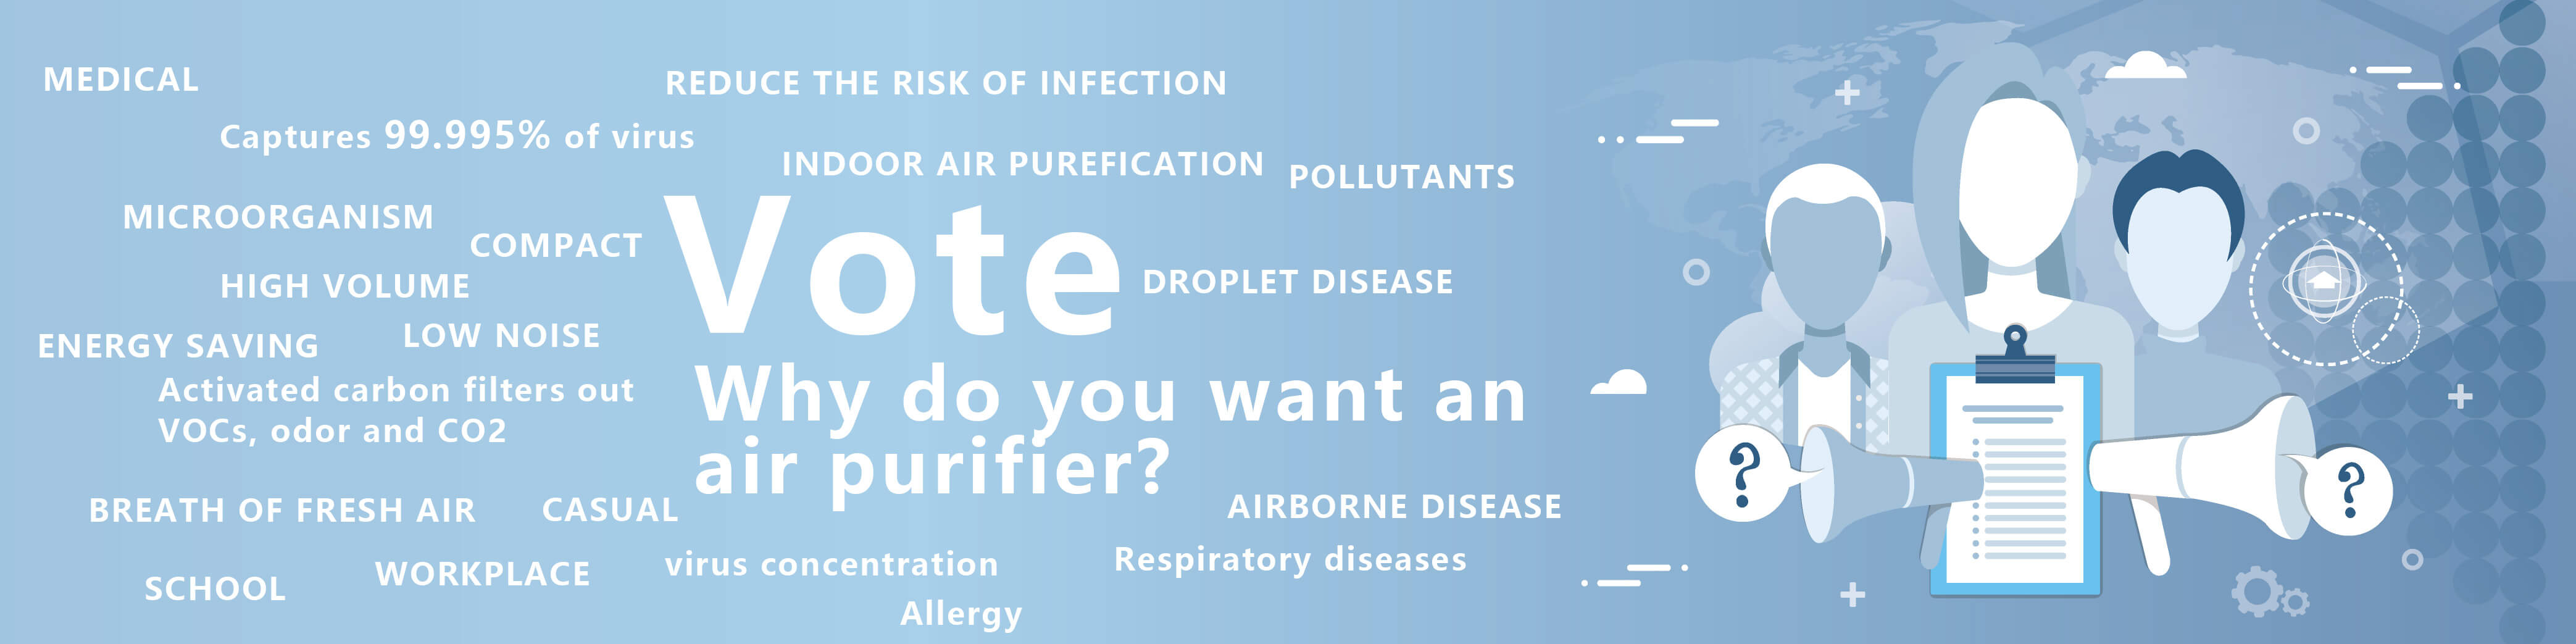 I would like to buy an air purifier, because: